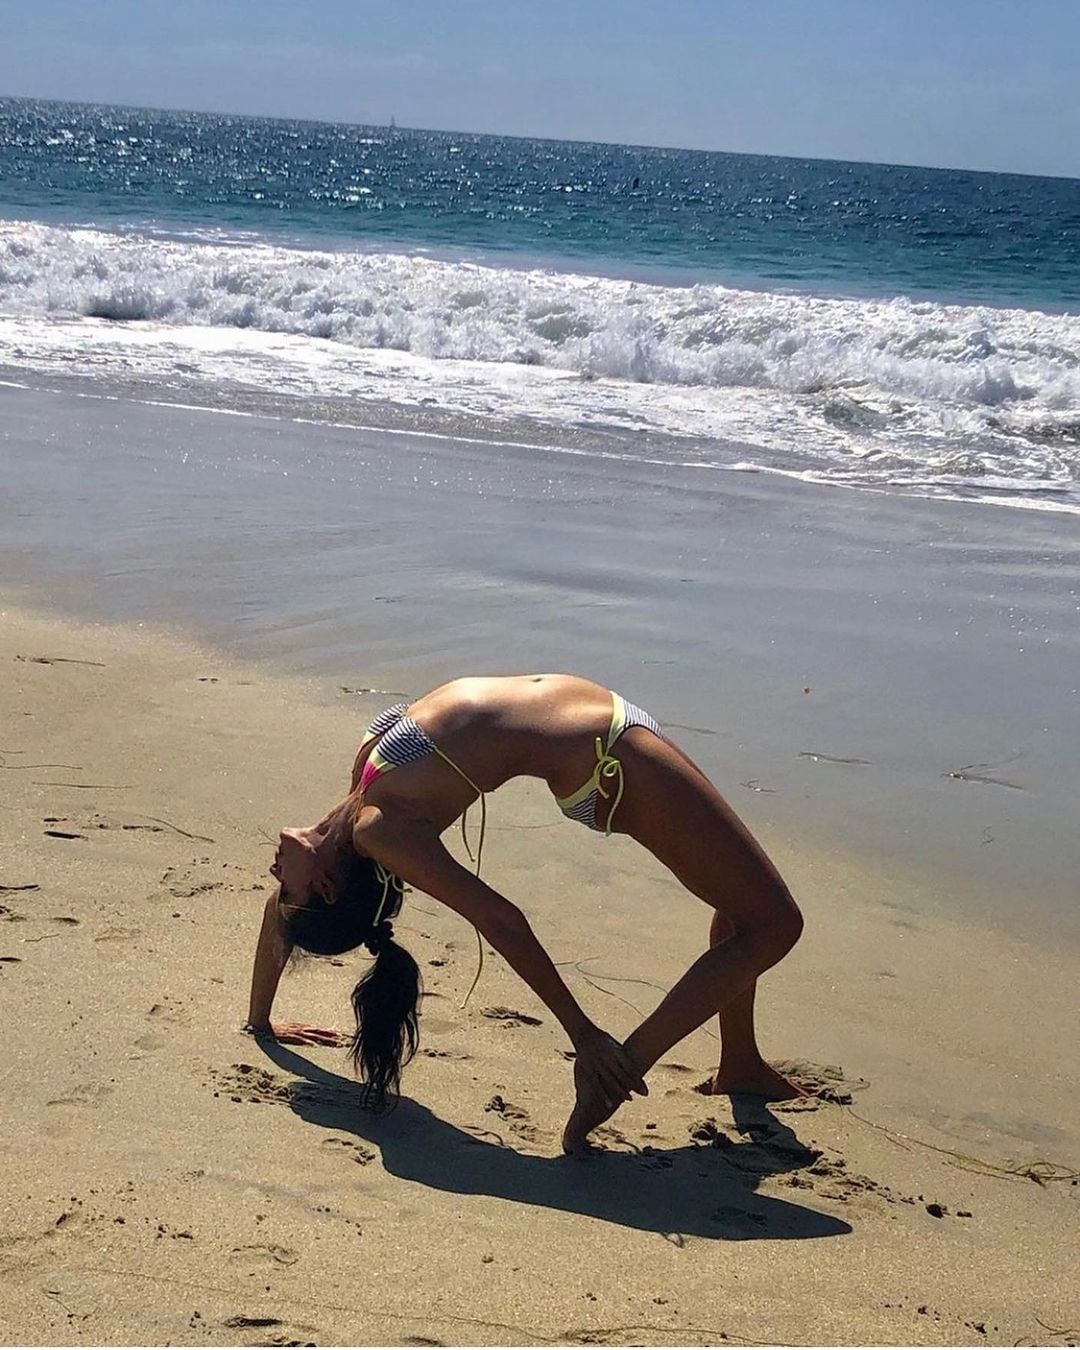  Vidya practices a posture on the beach. (Image: Instagram)